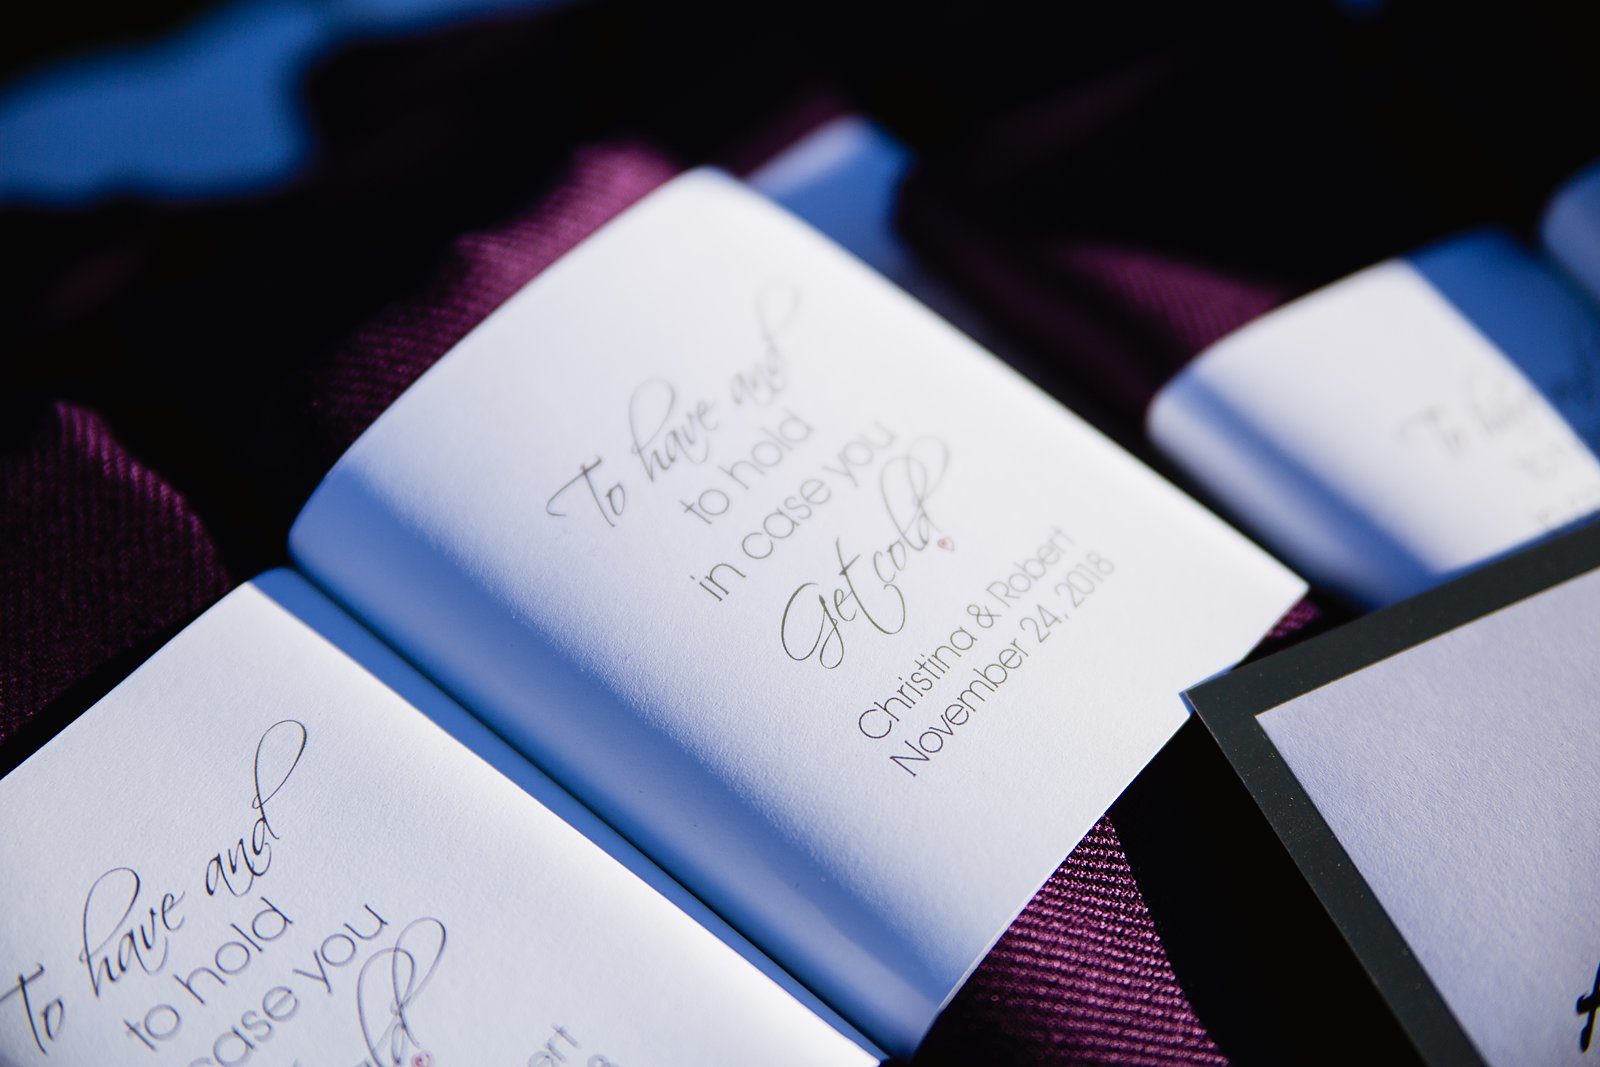 To have and to hold Pashmina wedding favors by PMA Photography.